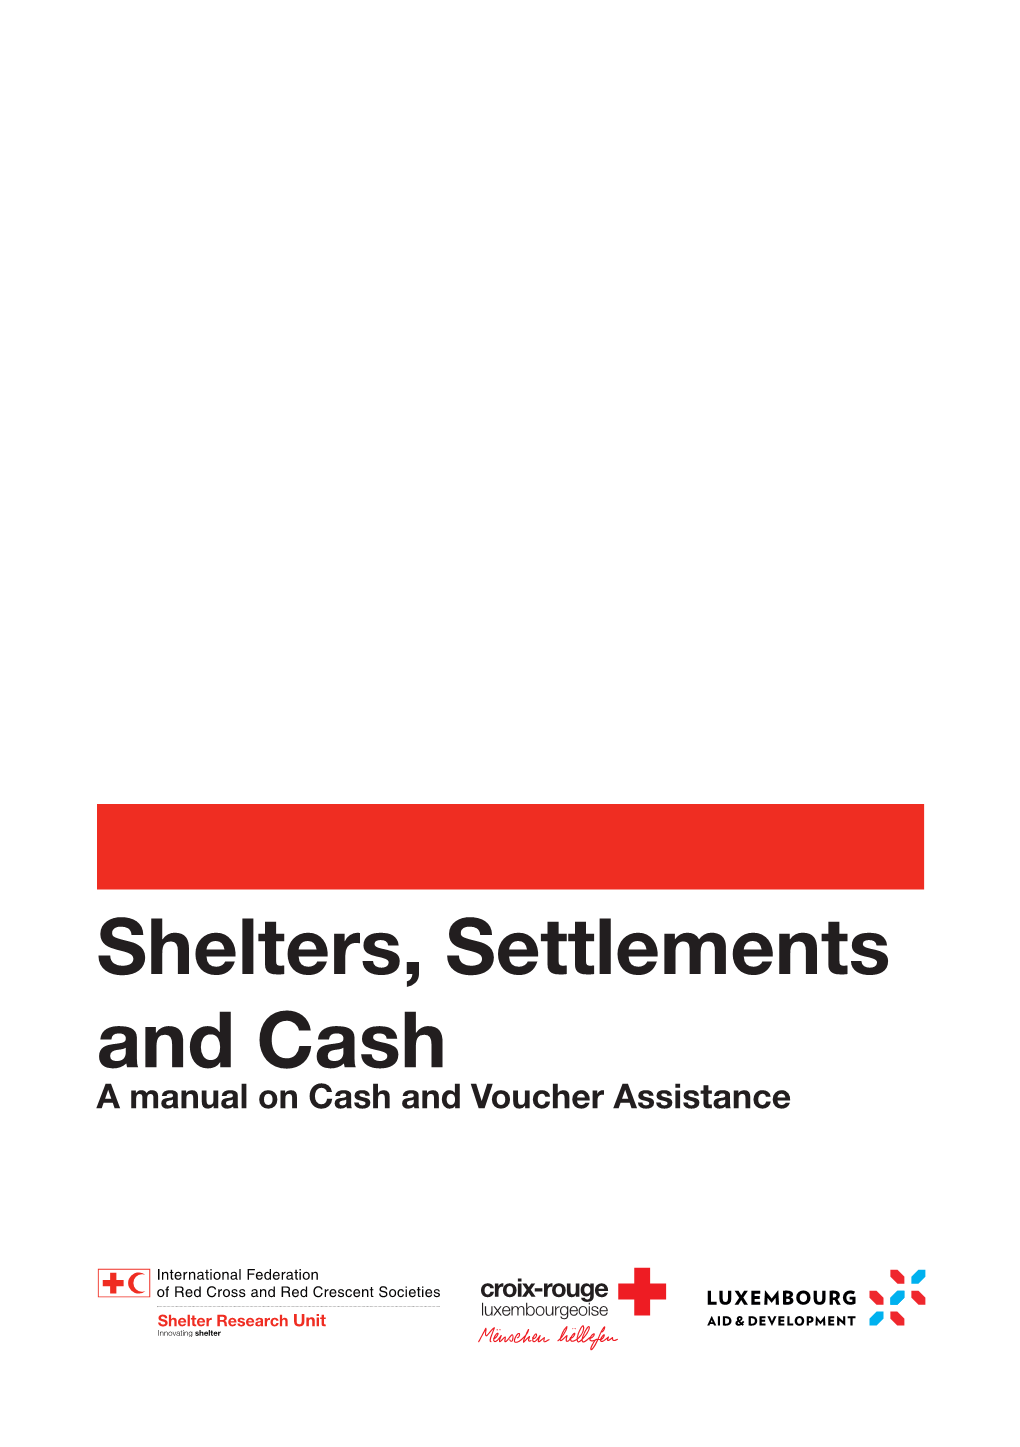 Shelters, Settlements and Cash